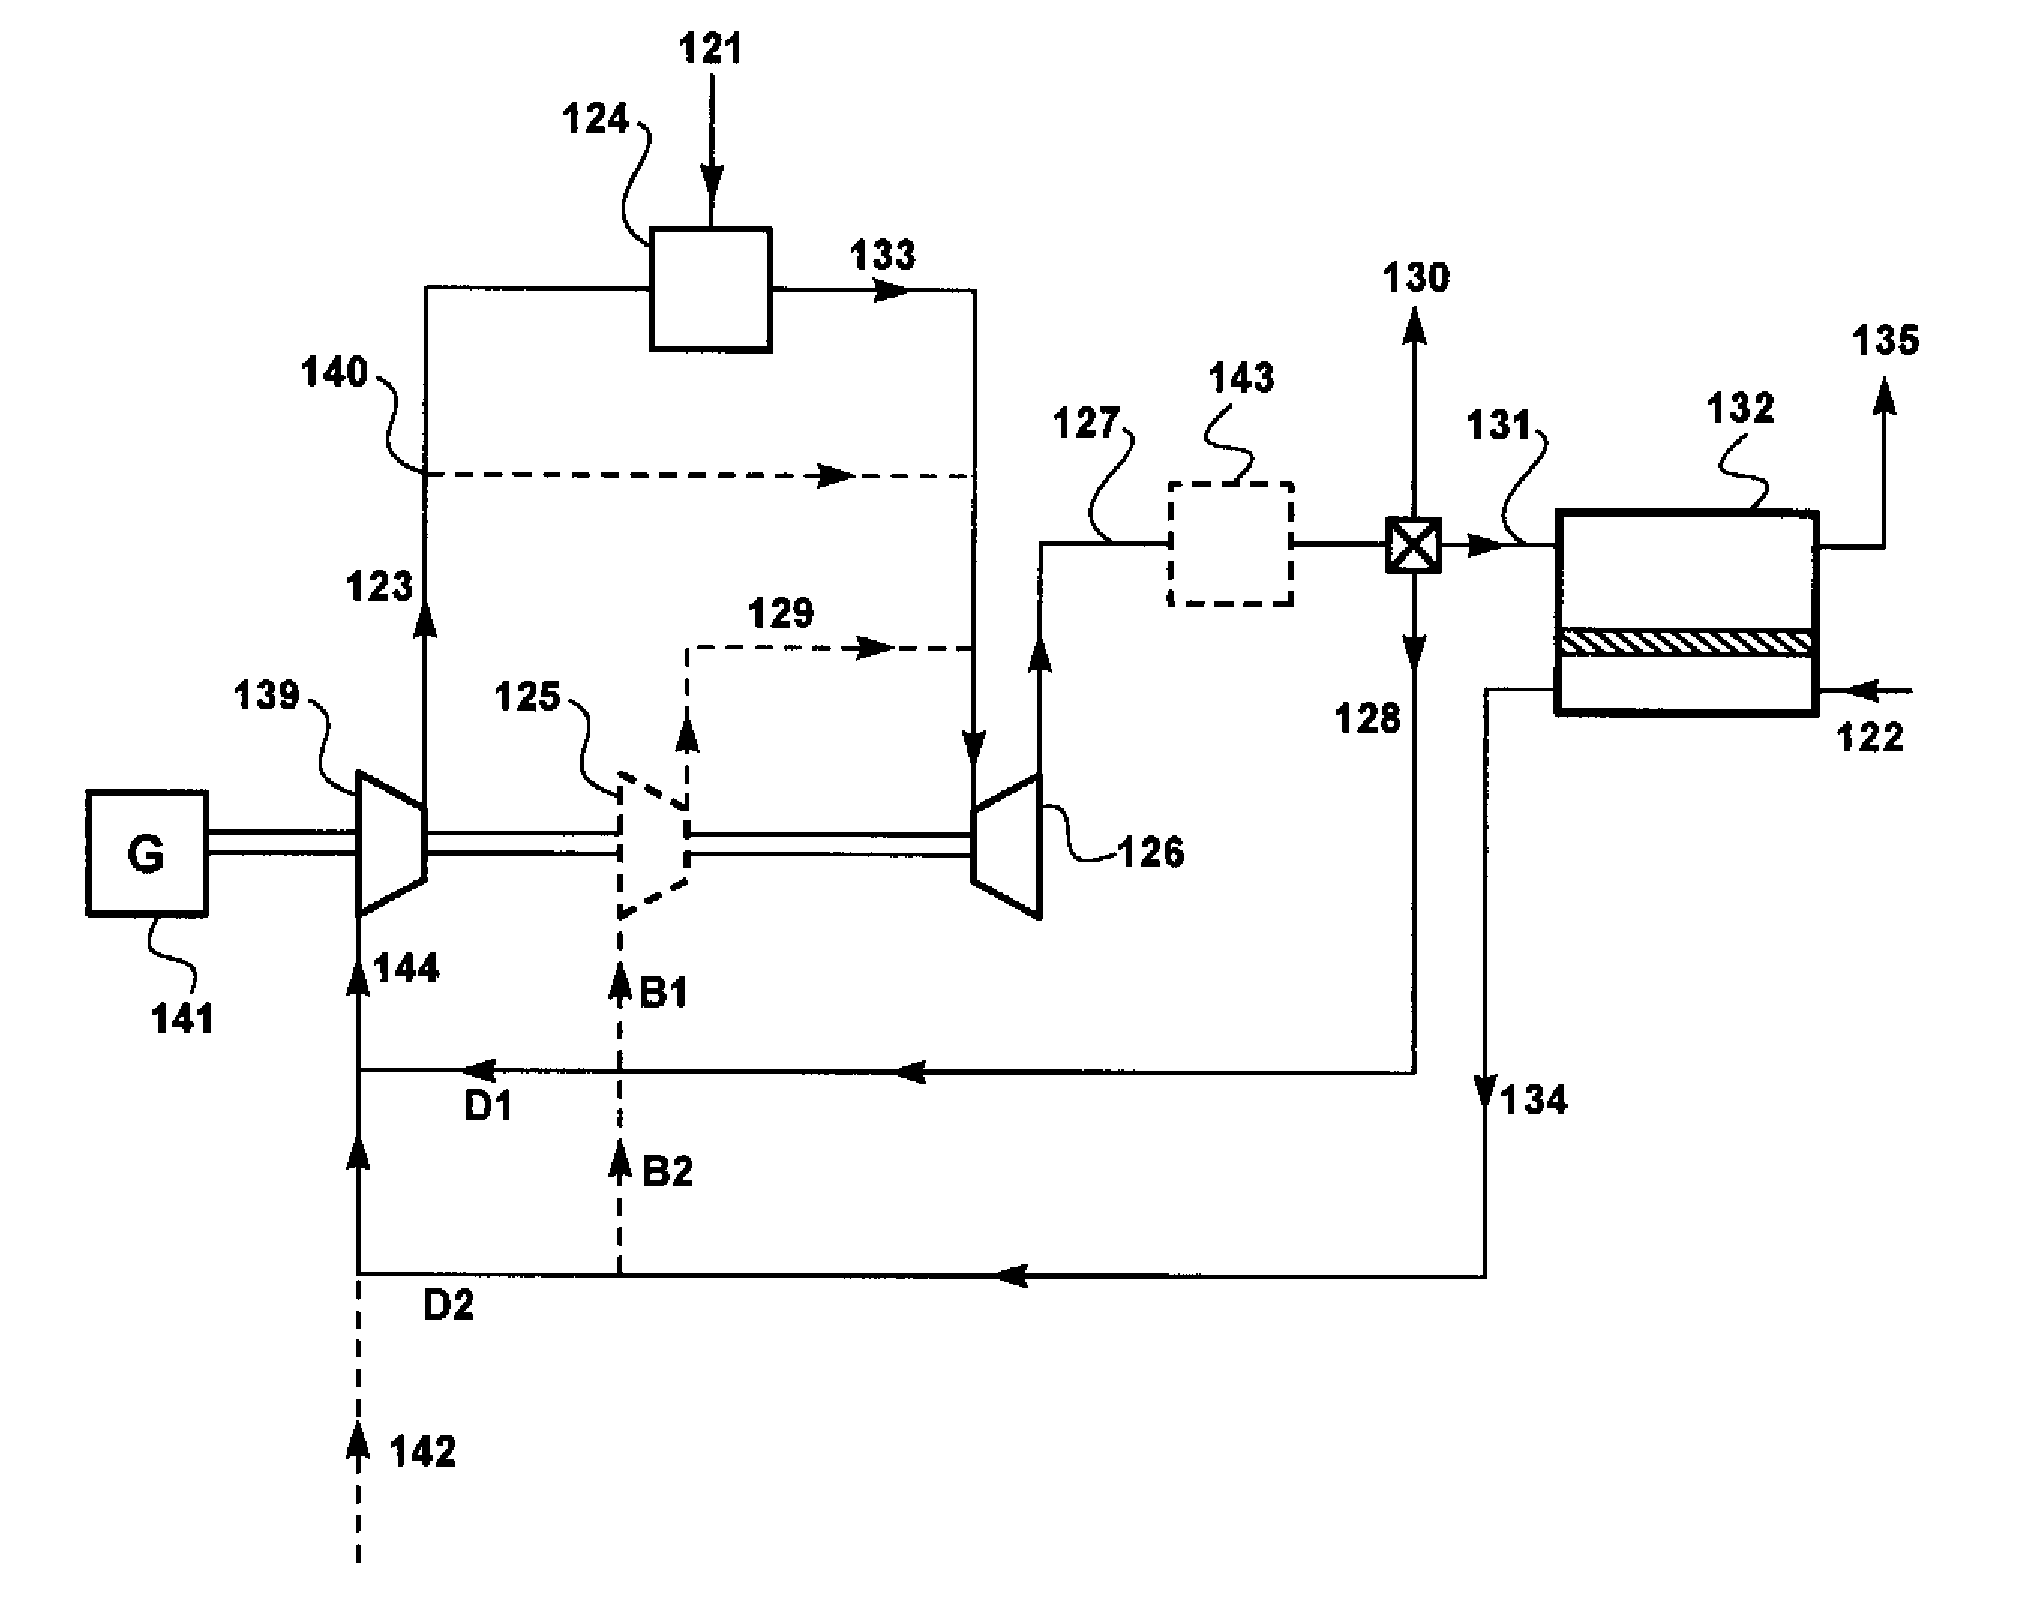 Power generation process with partial recycle of carbon dioxide